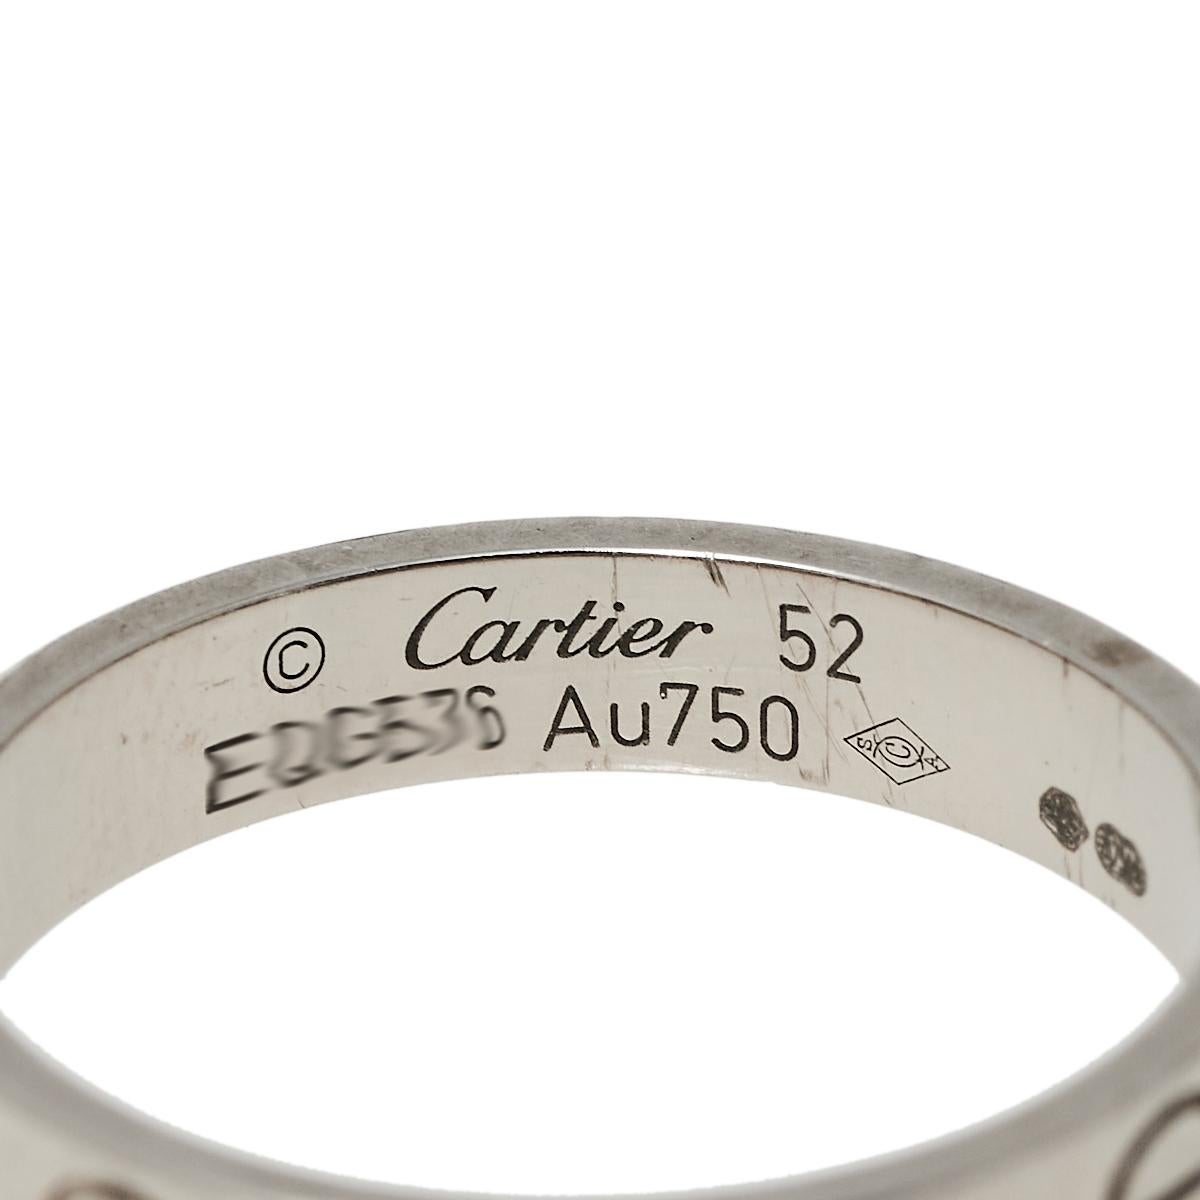 Contemporary Cartier Love 18K White Gold Wedding Band Ring Size 52